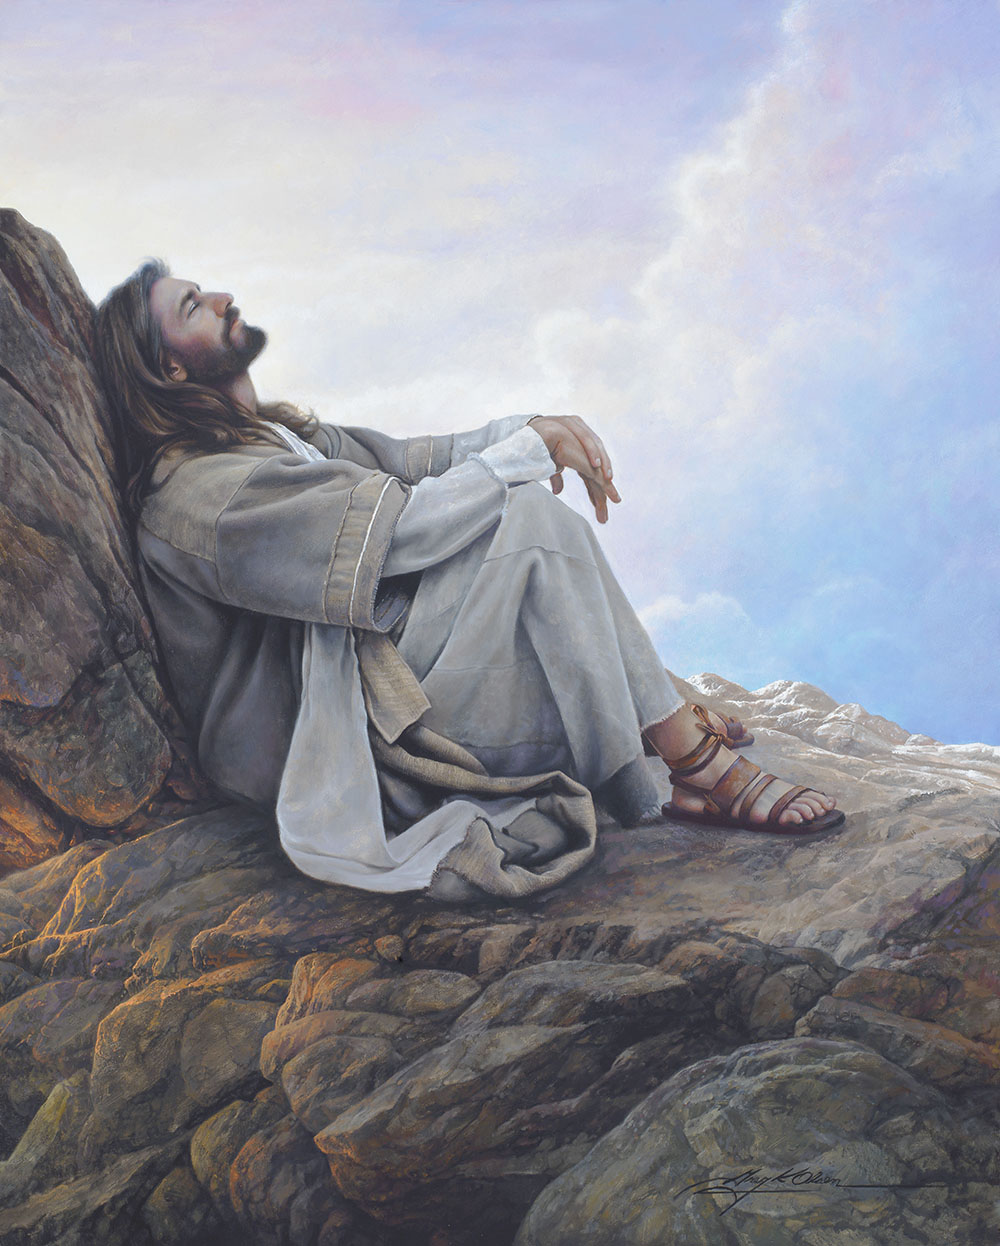 The Kingdom Within by Greg Olsen